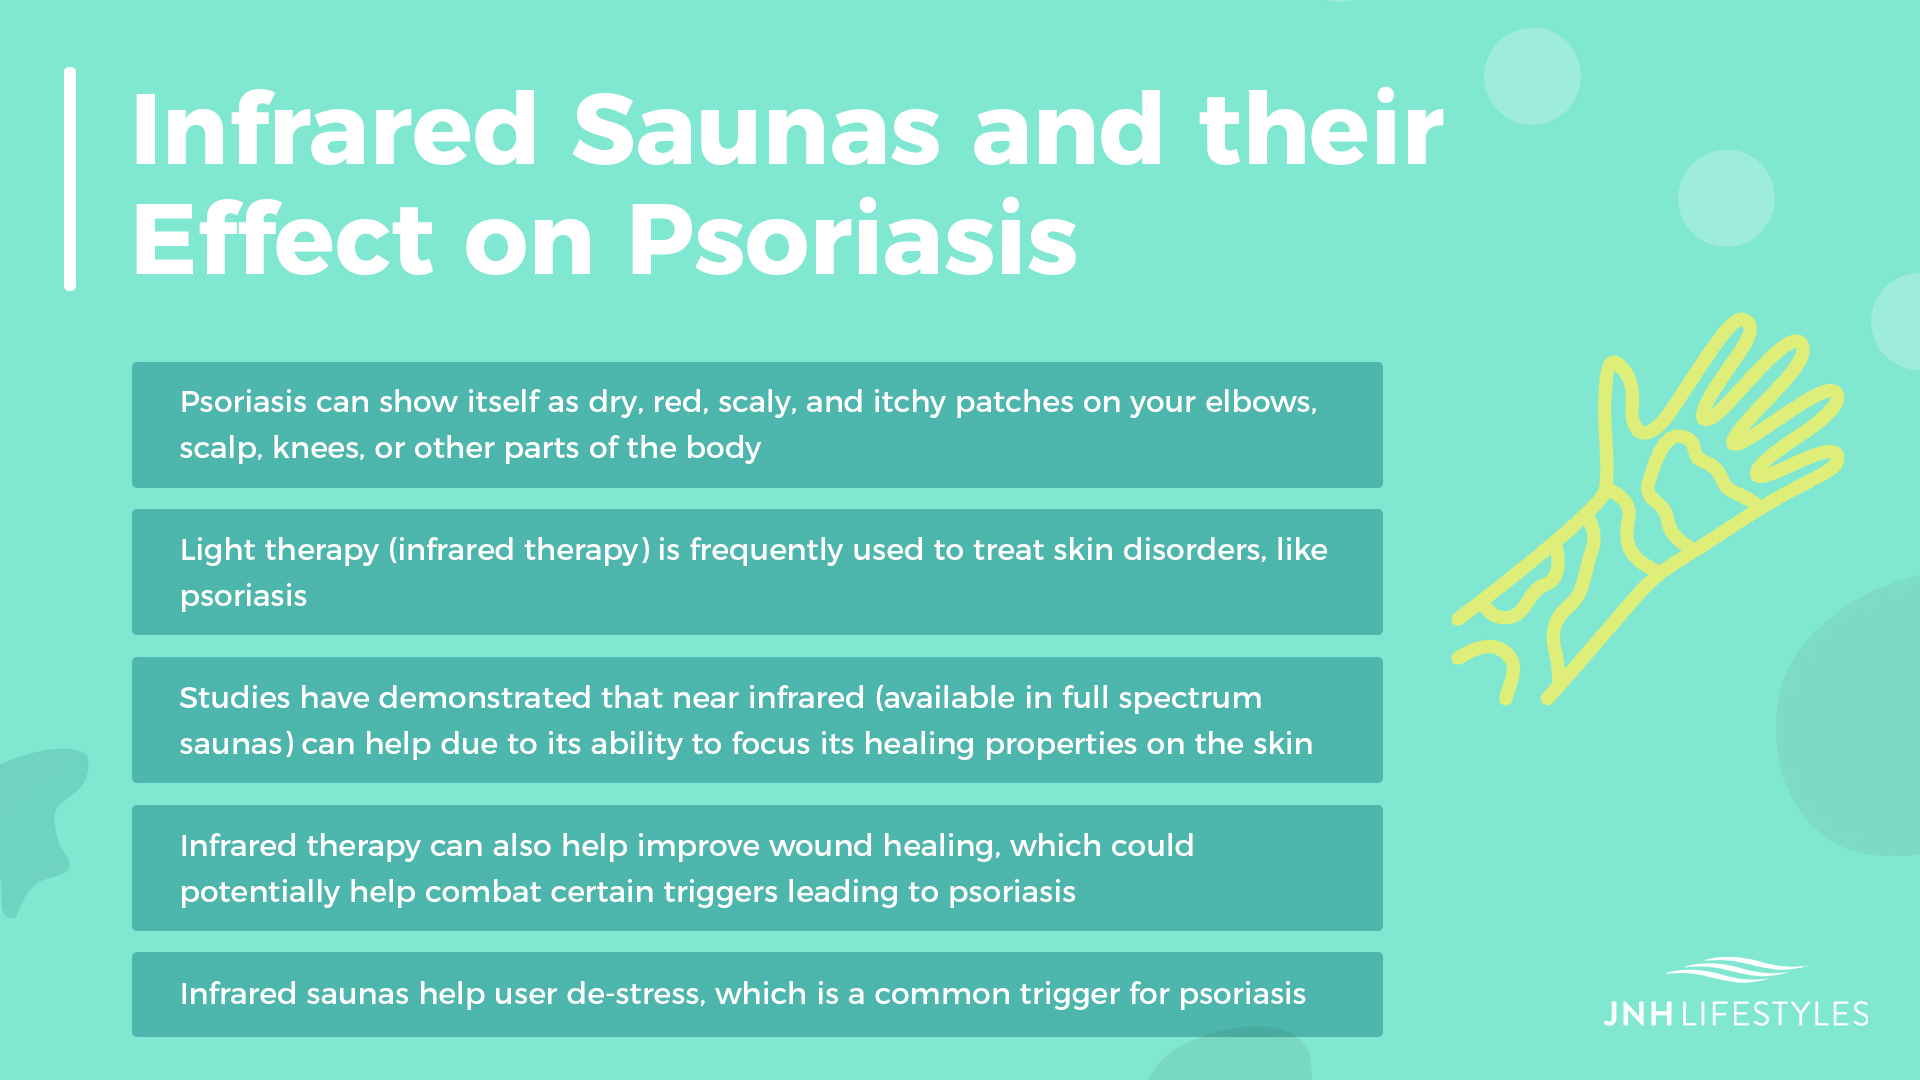 Infrared Saunas and their Effect on Psoriasis -Psoriasis can show itself as dry, red, scaly, and itchy patches on your elbows, scalp, knees, or other parts of the body -Light therapy (infrared therapy) is frequently used to treat skin disorders, like psoriasis -Studies have demonstrated that near infrared (available in full spectrum saunas) can help due to its ability to focus it's healing properties on the skin -Infrared therapy can also help improve wound healing, which could potentially help combat certain triggers leading to psoriasis -Infrared saunas help user de-stress, which is a common trigger for psoriasis